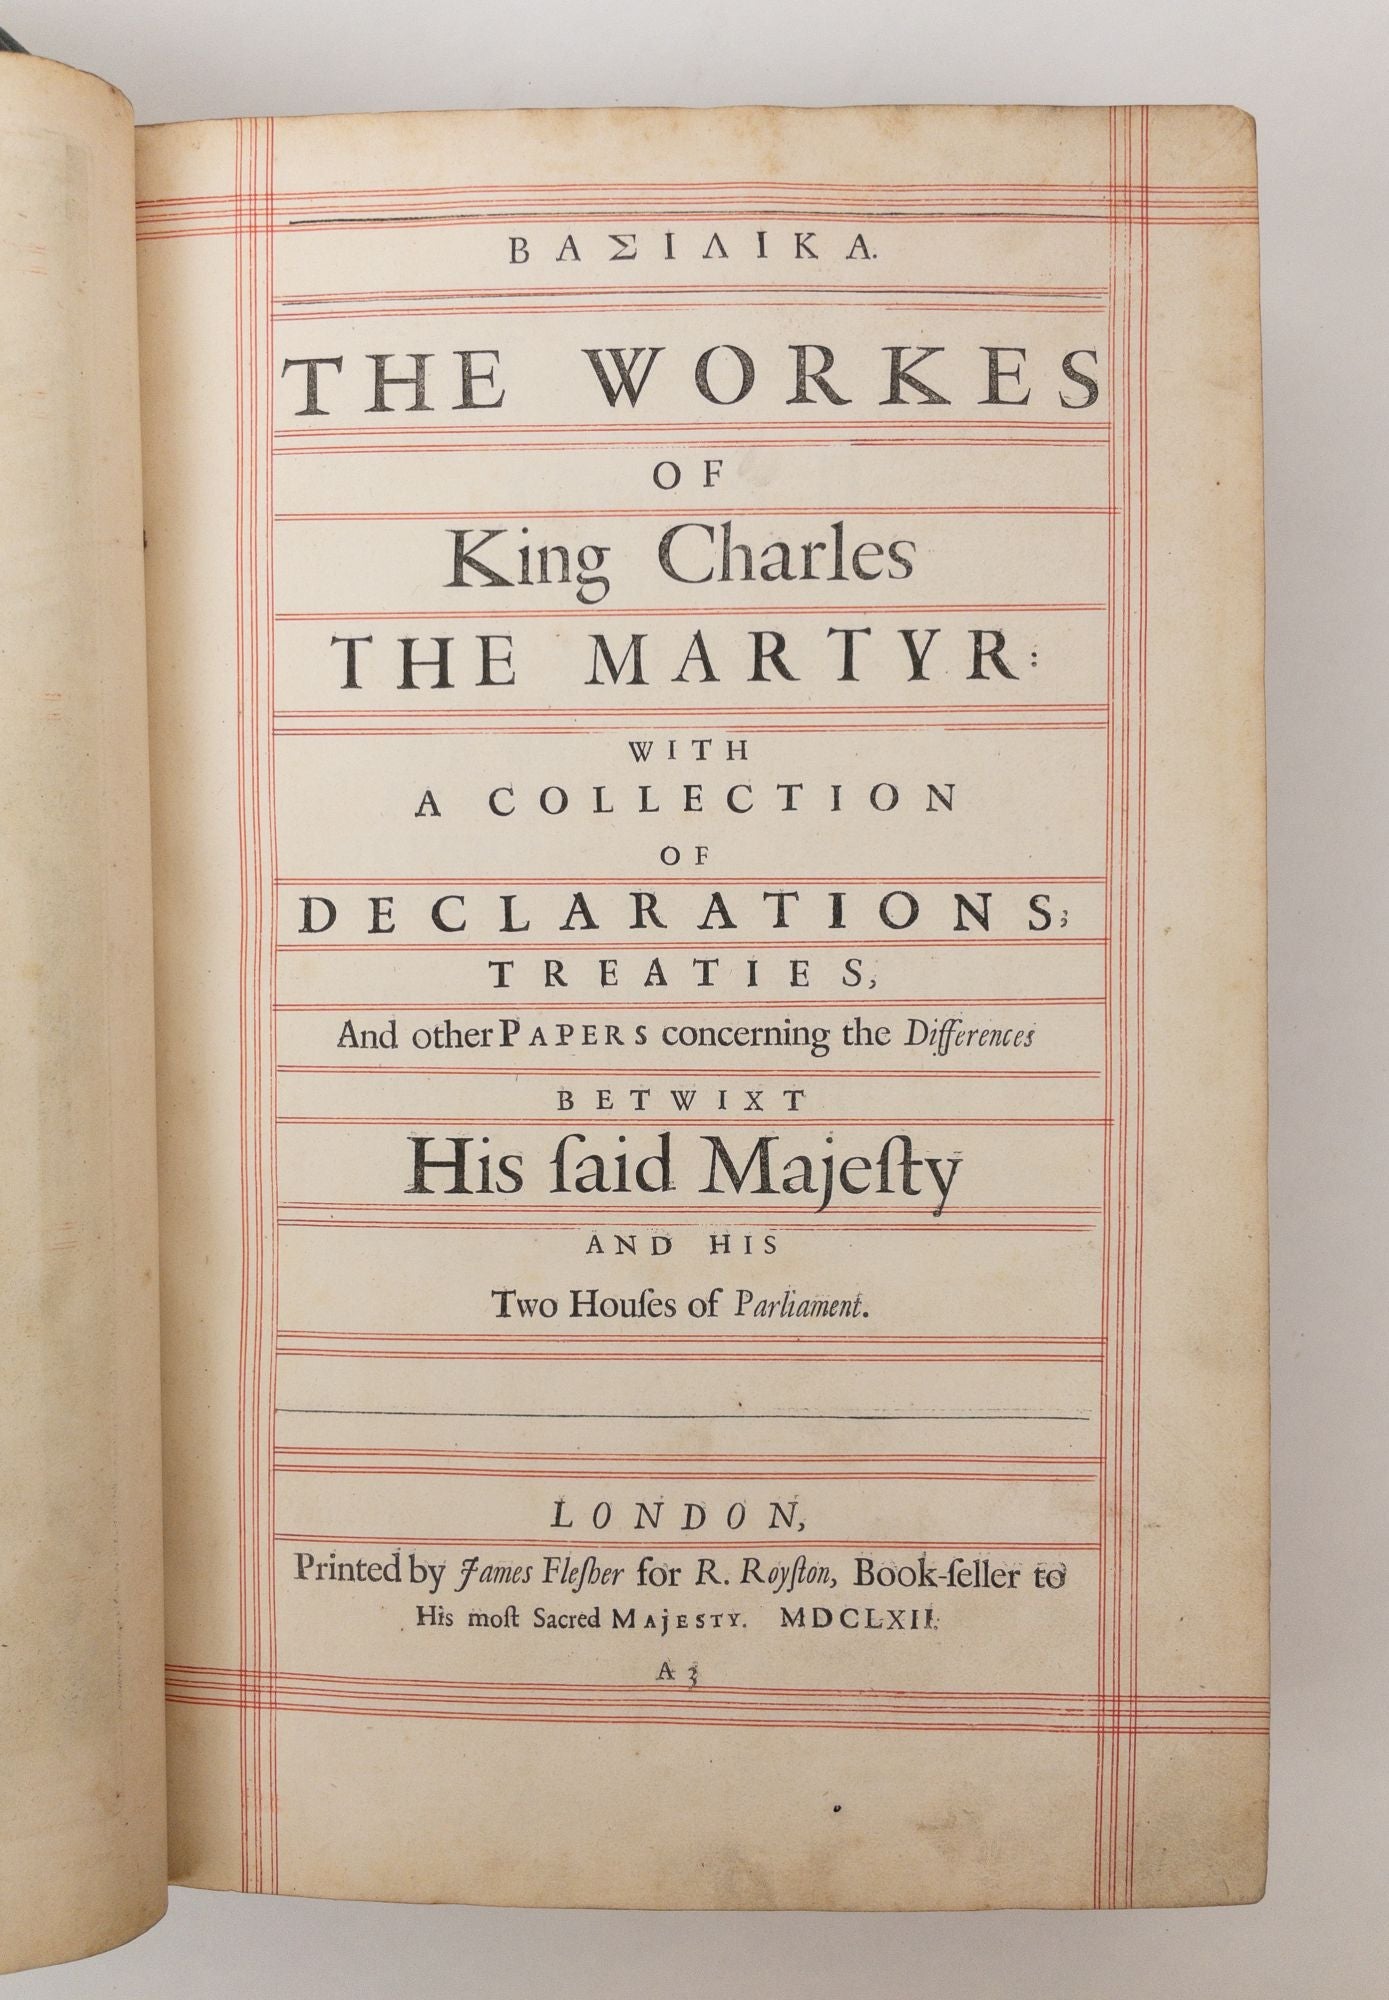 Product Image for BASILIKA: THE WORKES OF KING CHARLES THE MARTYR; WITH A COLLECTION OF DECLARATIONS, TREATIES AND OTHER PAPERS CONCERNING THE DIFFERENCES BETWIXT HIS SAID MAJESTY AND HIS TWO HOUSES OF PARLIAMENT